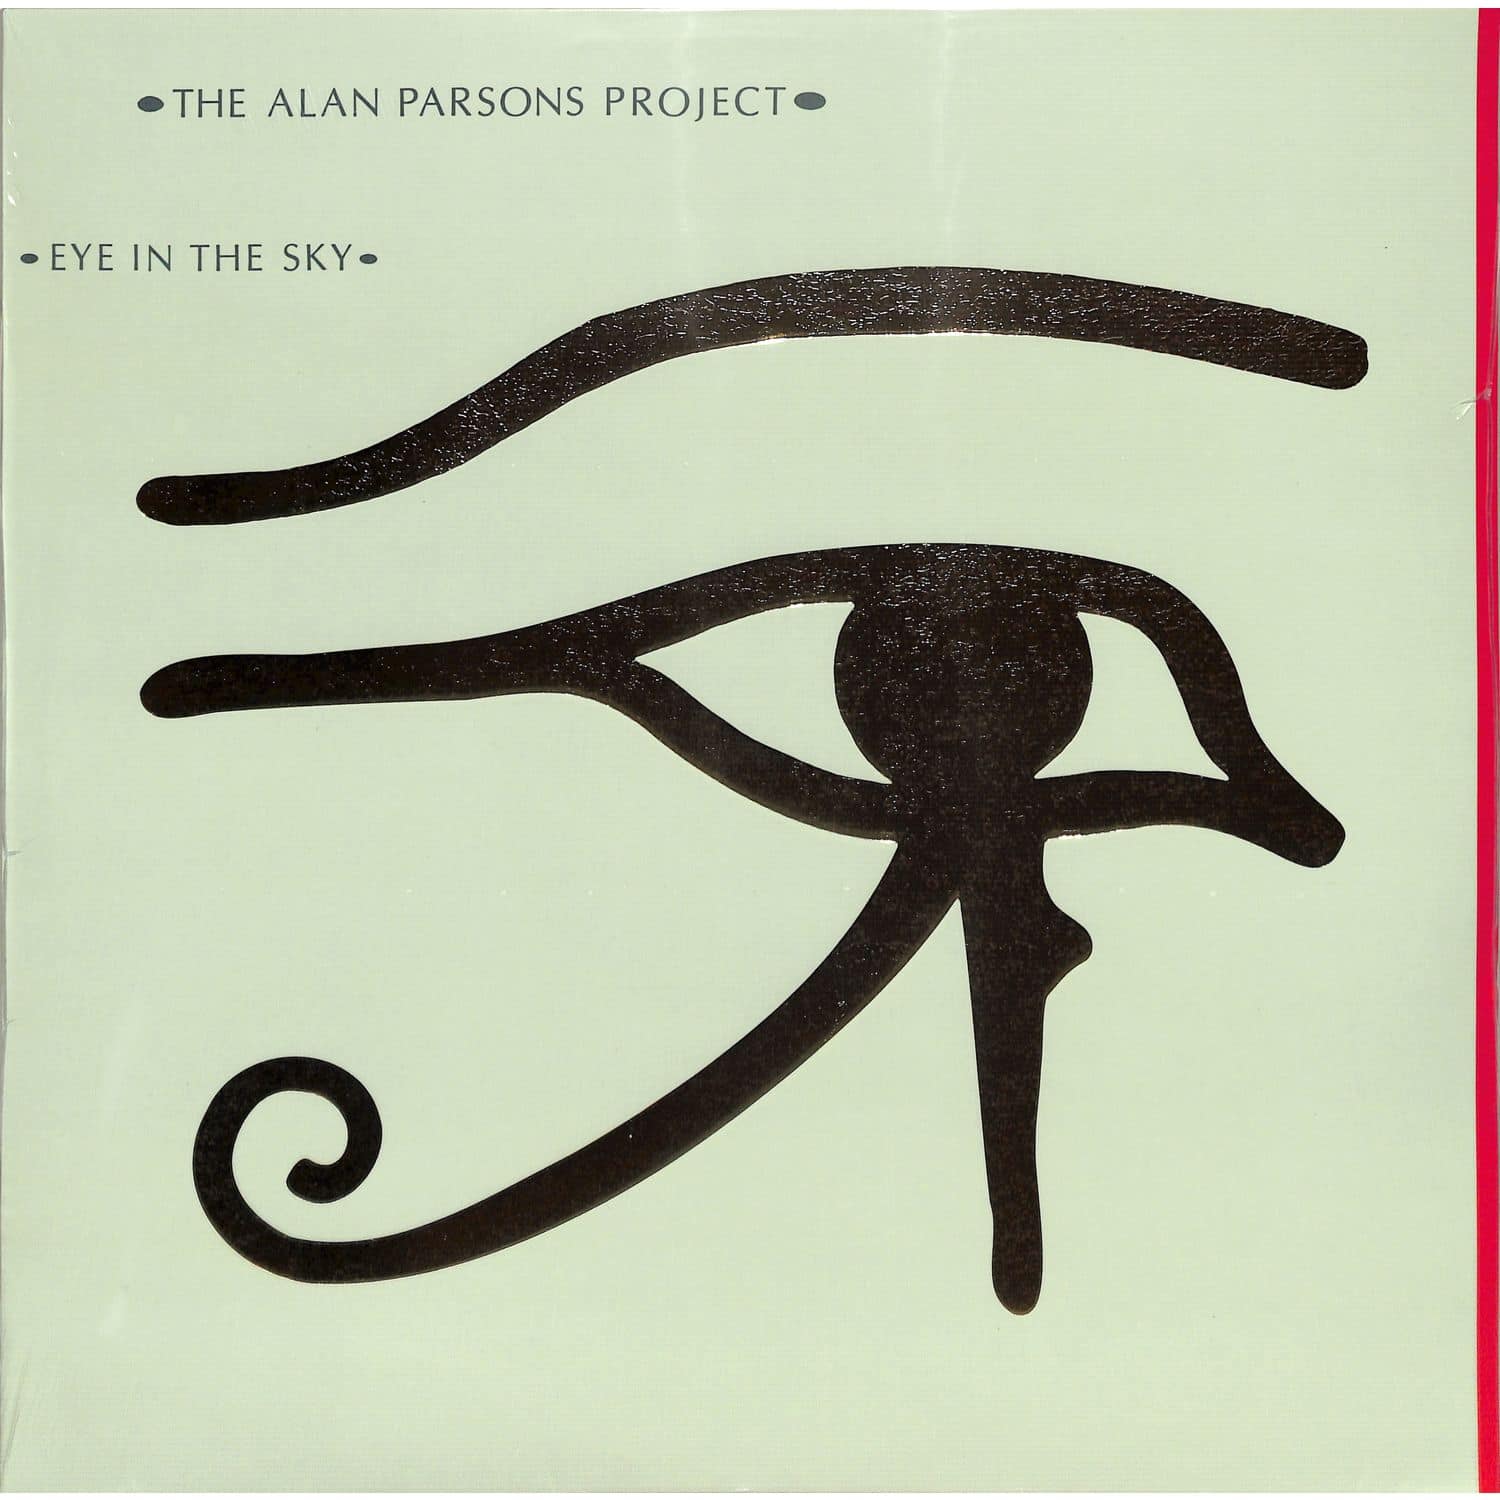 The Alan Parsons Project - EYE IN THE SKY 